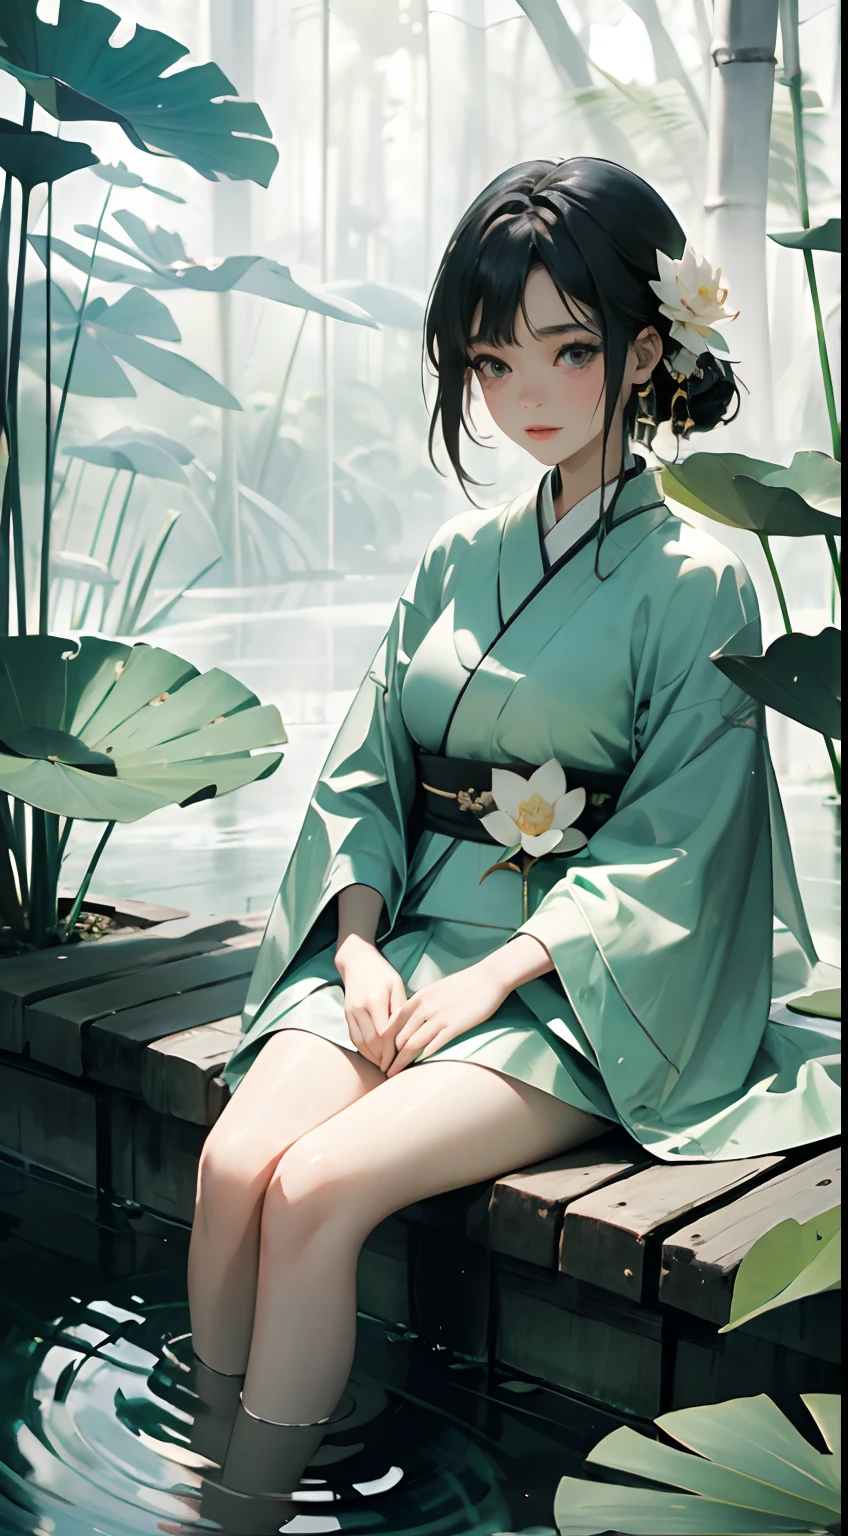 A pond full of lotus, a  sitting on the lotus leaves of the pond, happily，huge lotus leaves, barefoot, dressed in white and green hanfu, light and shadow, a masterpiece